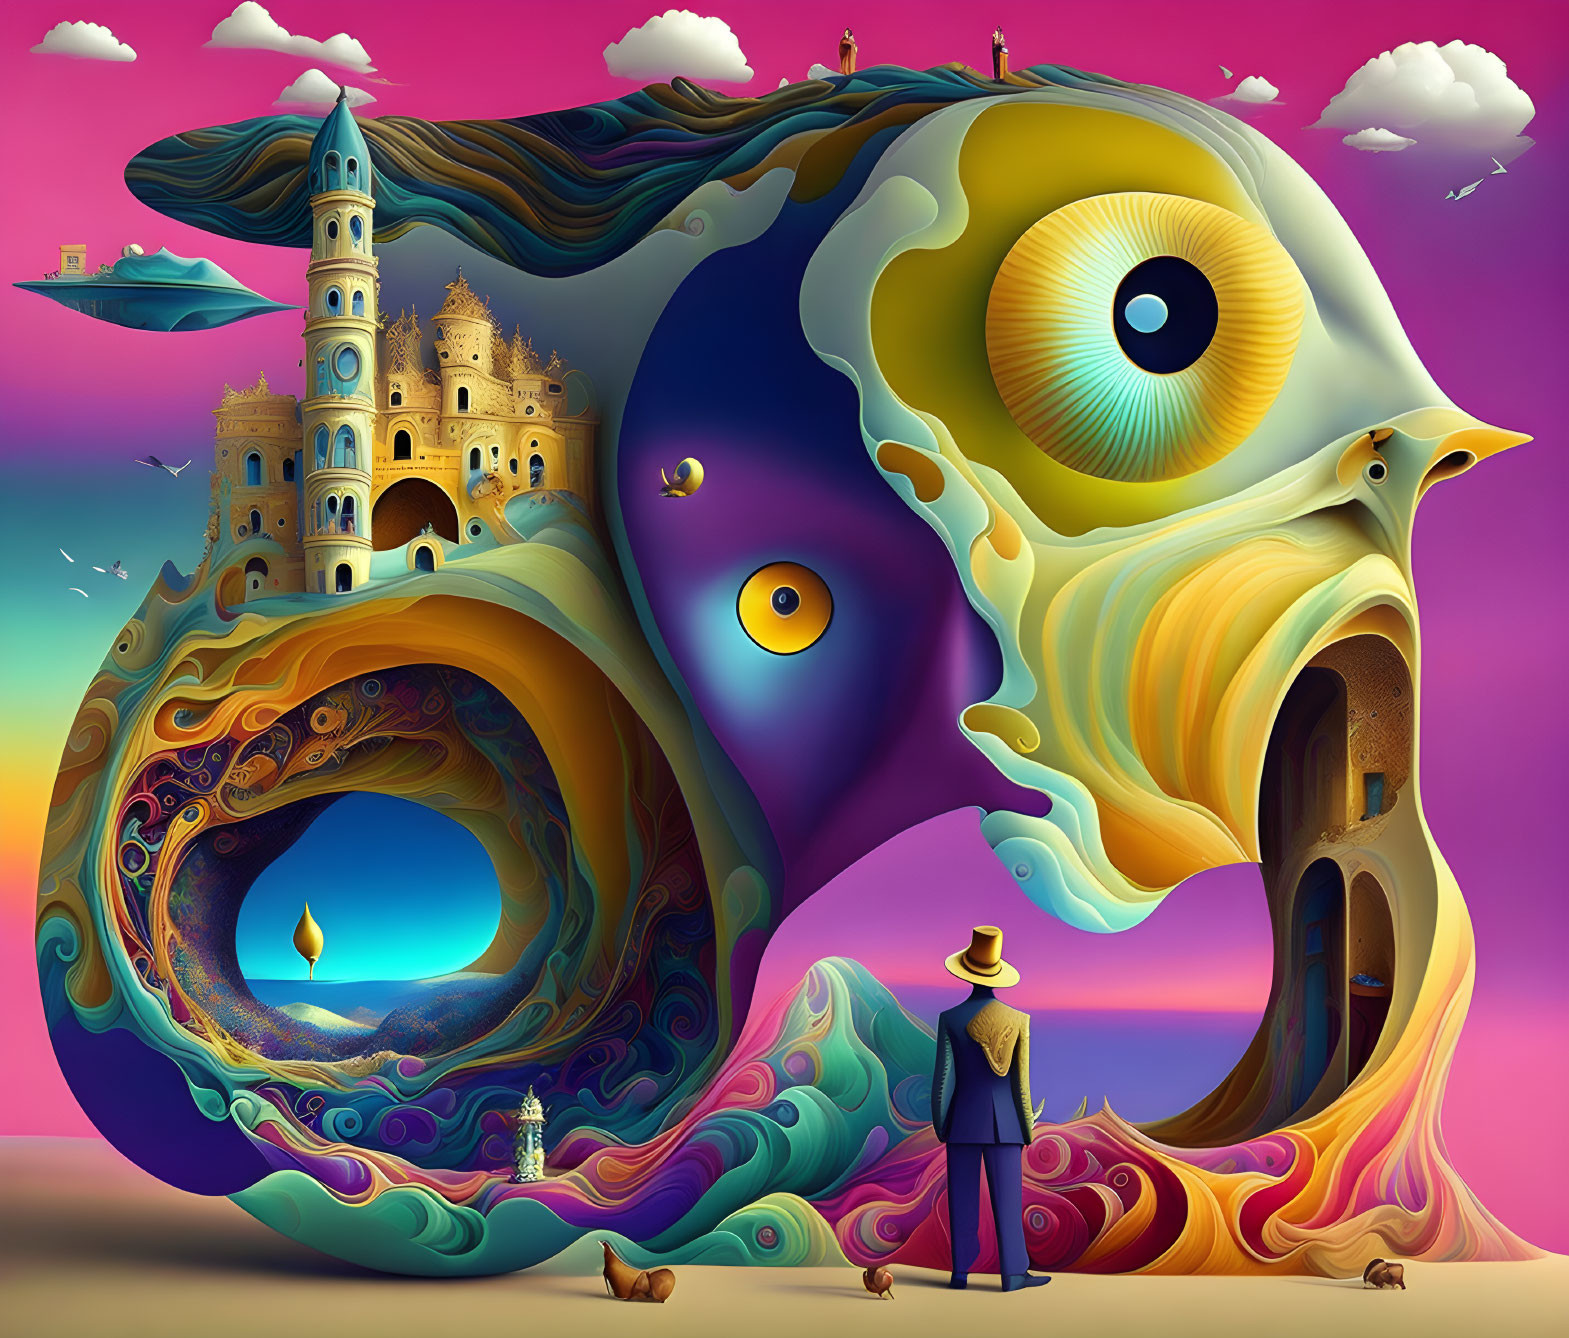 Colorful surreal artwork: abstract fish, man in hat, whimsical structures, floating elements on pink